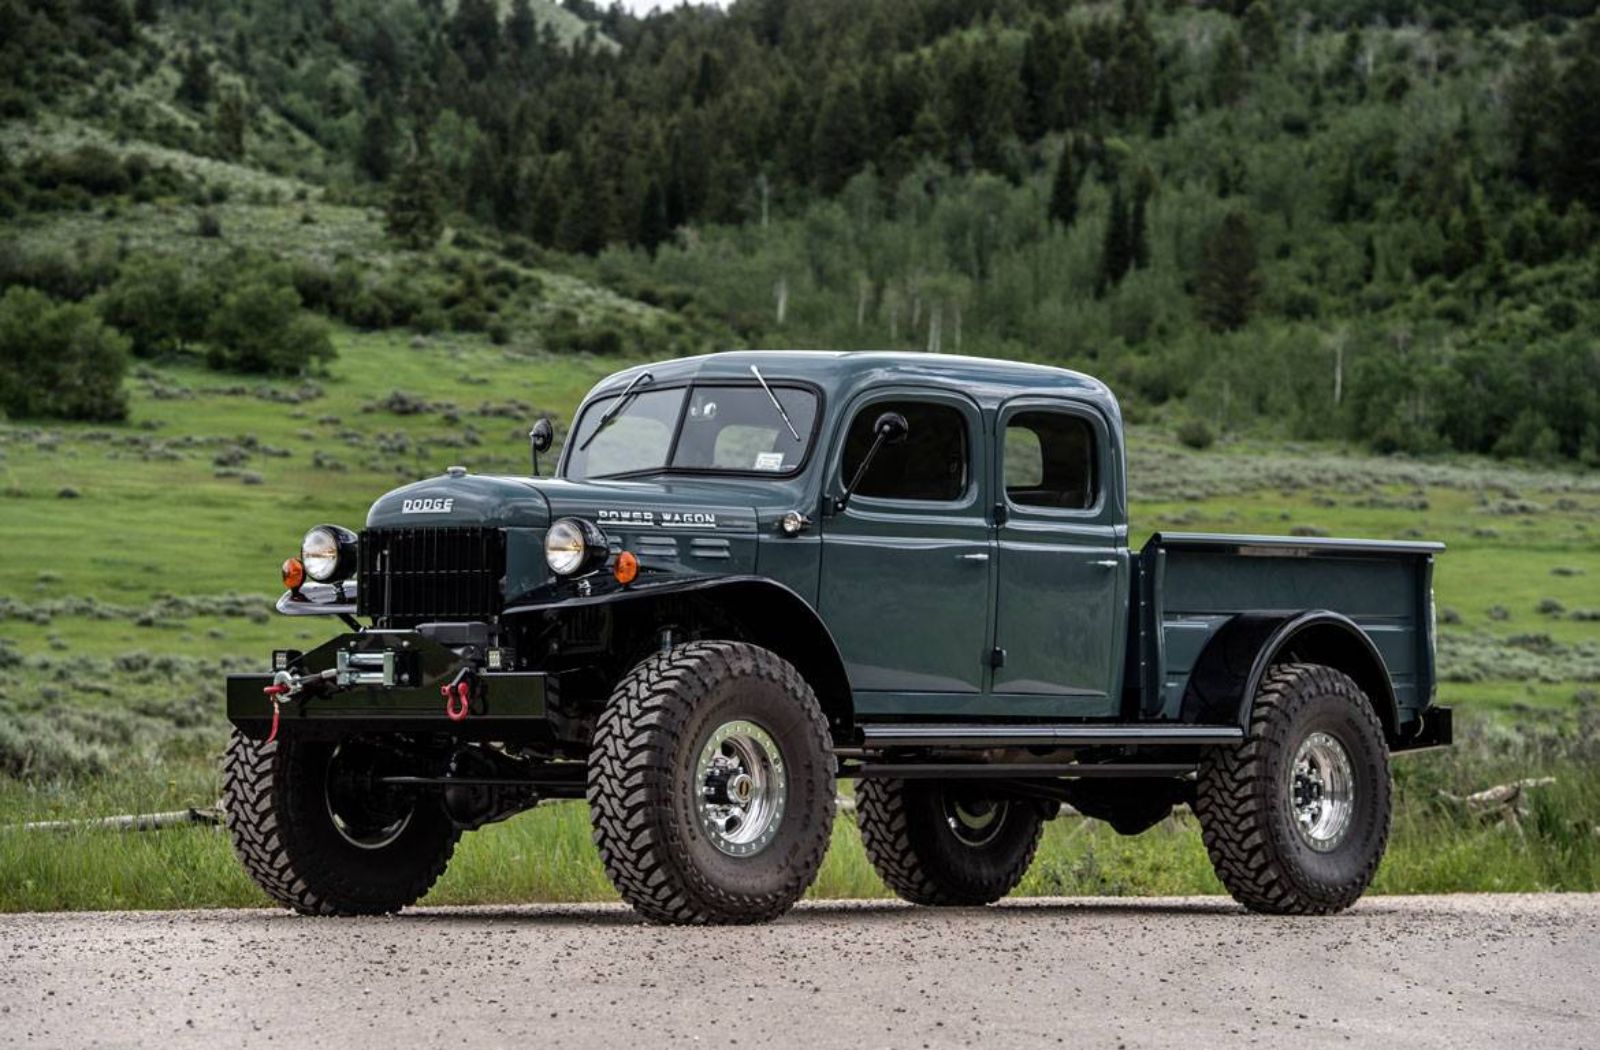 undervandsbåd Adgang Henfald Forget the Ram TRX, Legacy's 620-HP Vintage Power Wagon Is the Coolest  Truck You Can Buy - autoevolution